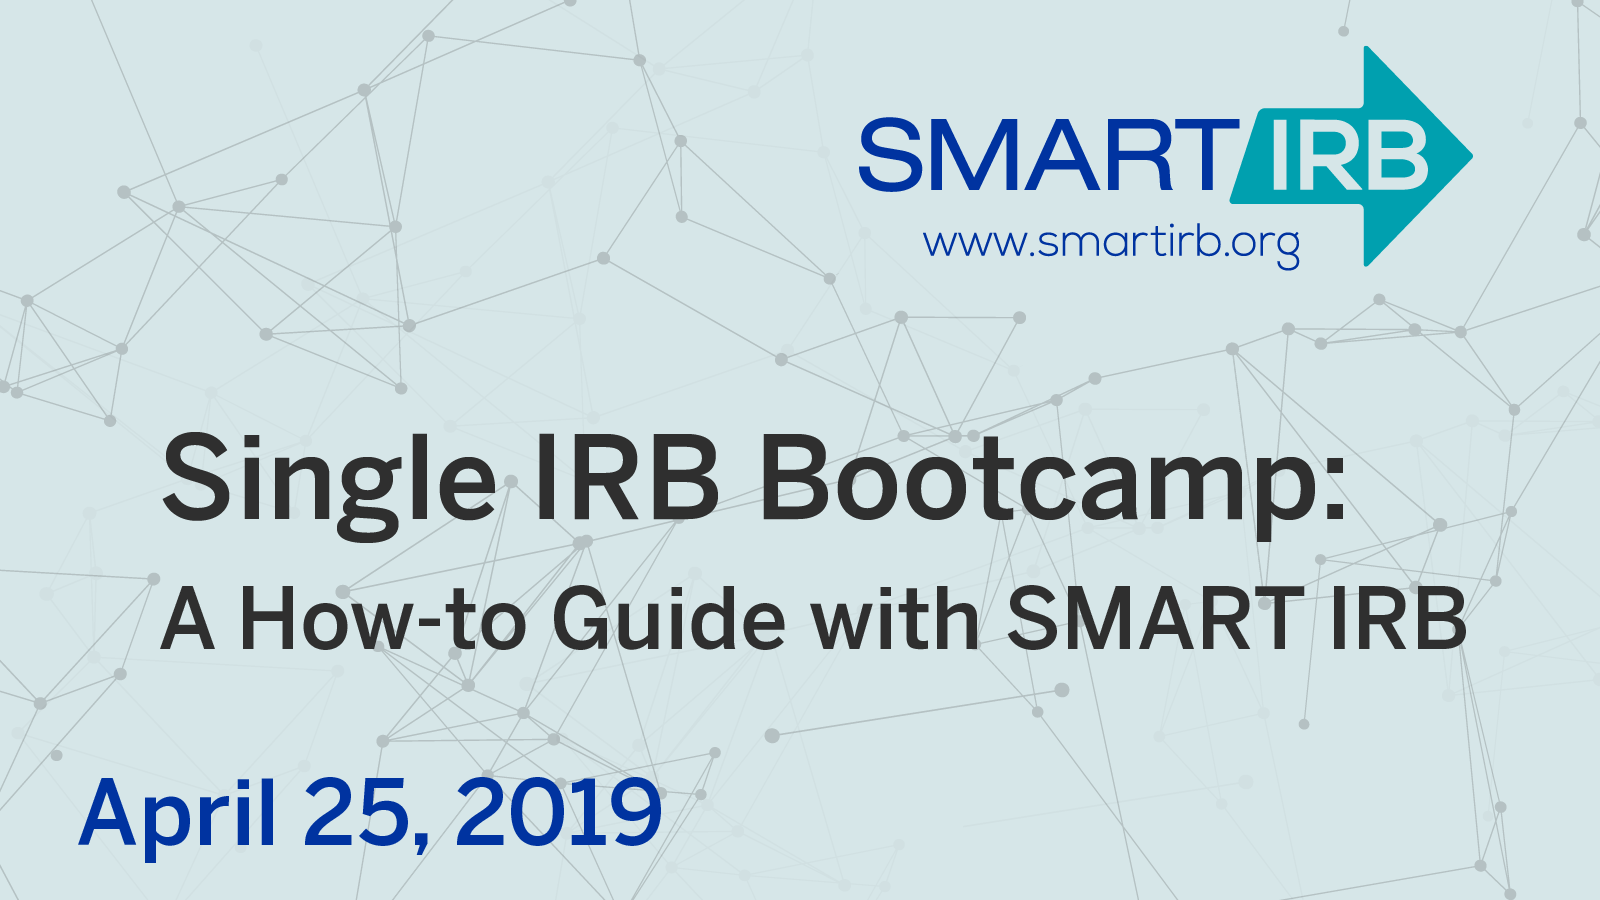 Single IRB Bootcamp: A How-to Guide with SMART IRB April 25, 2019